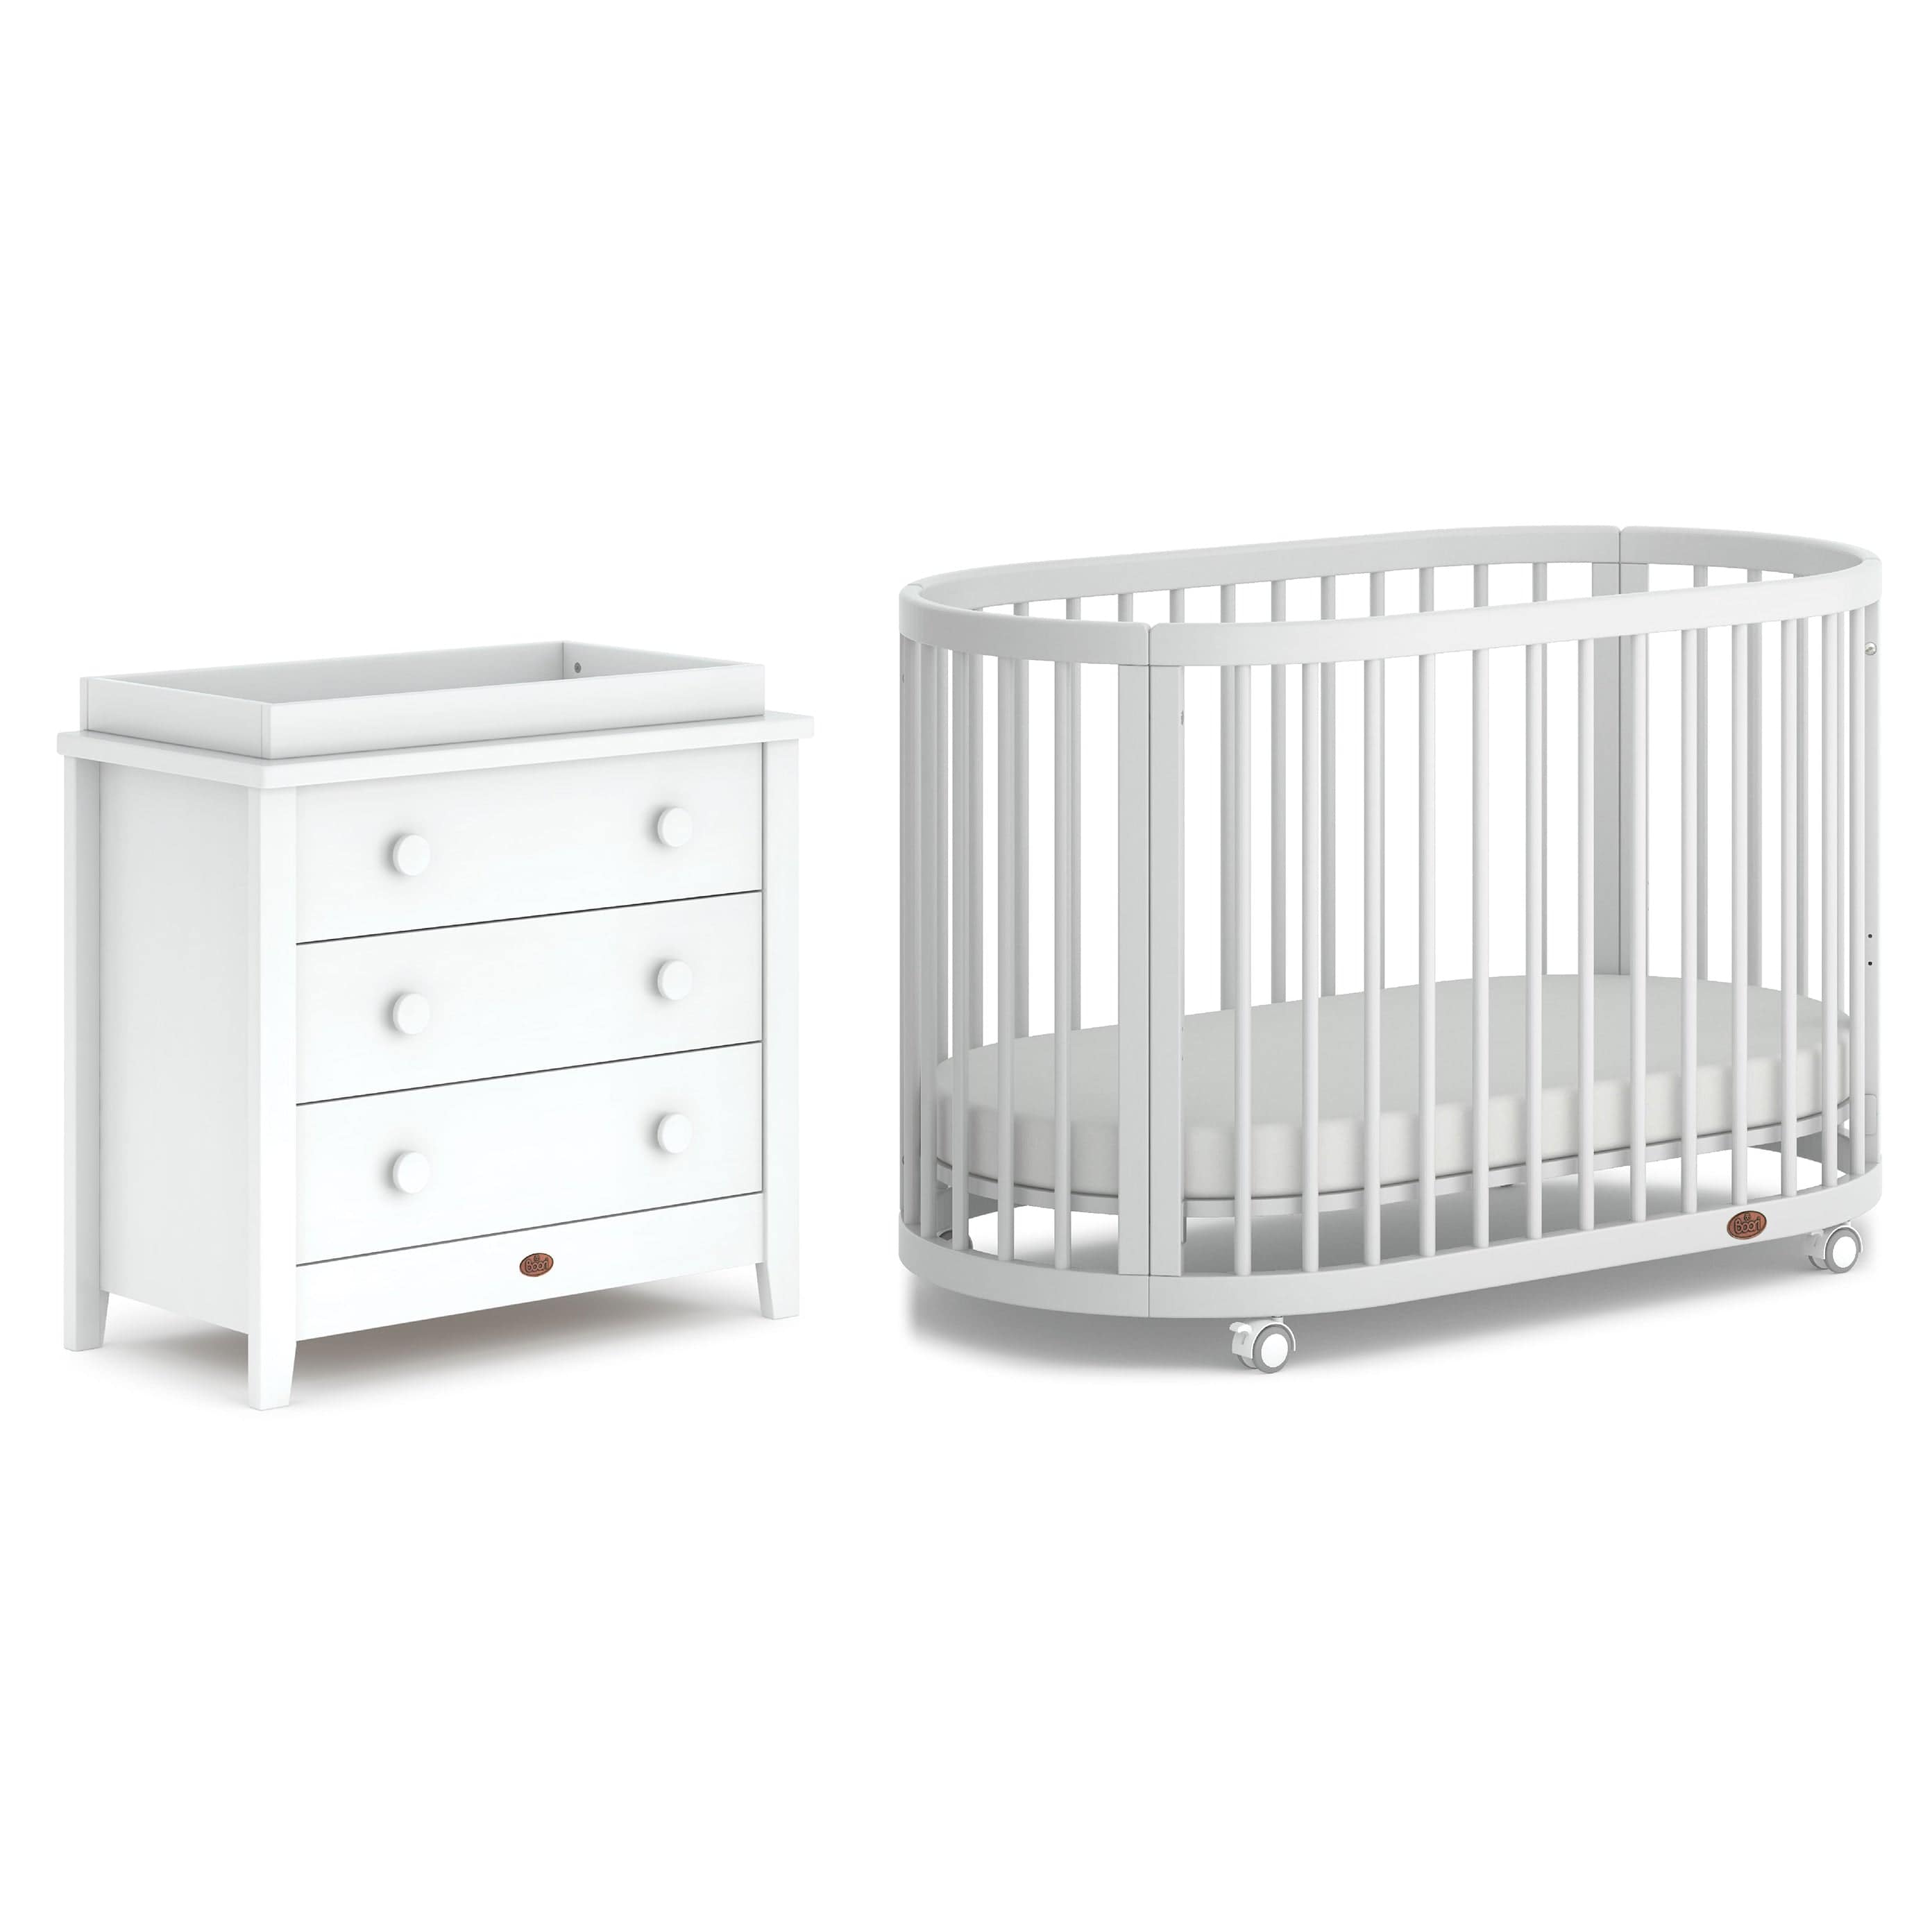 Boori Oasis 2 Piece Chest Changer Roomset Barley White Boori Roomsets